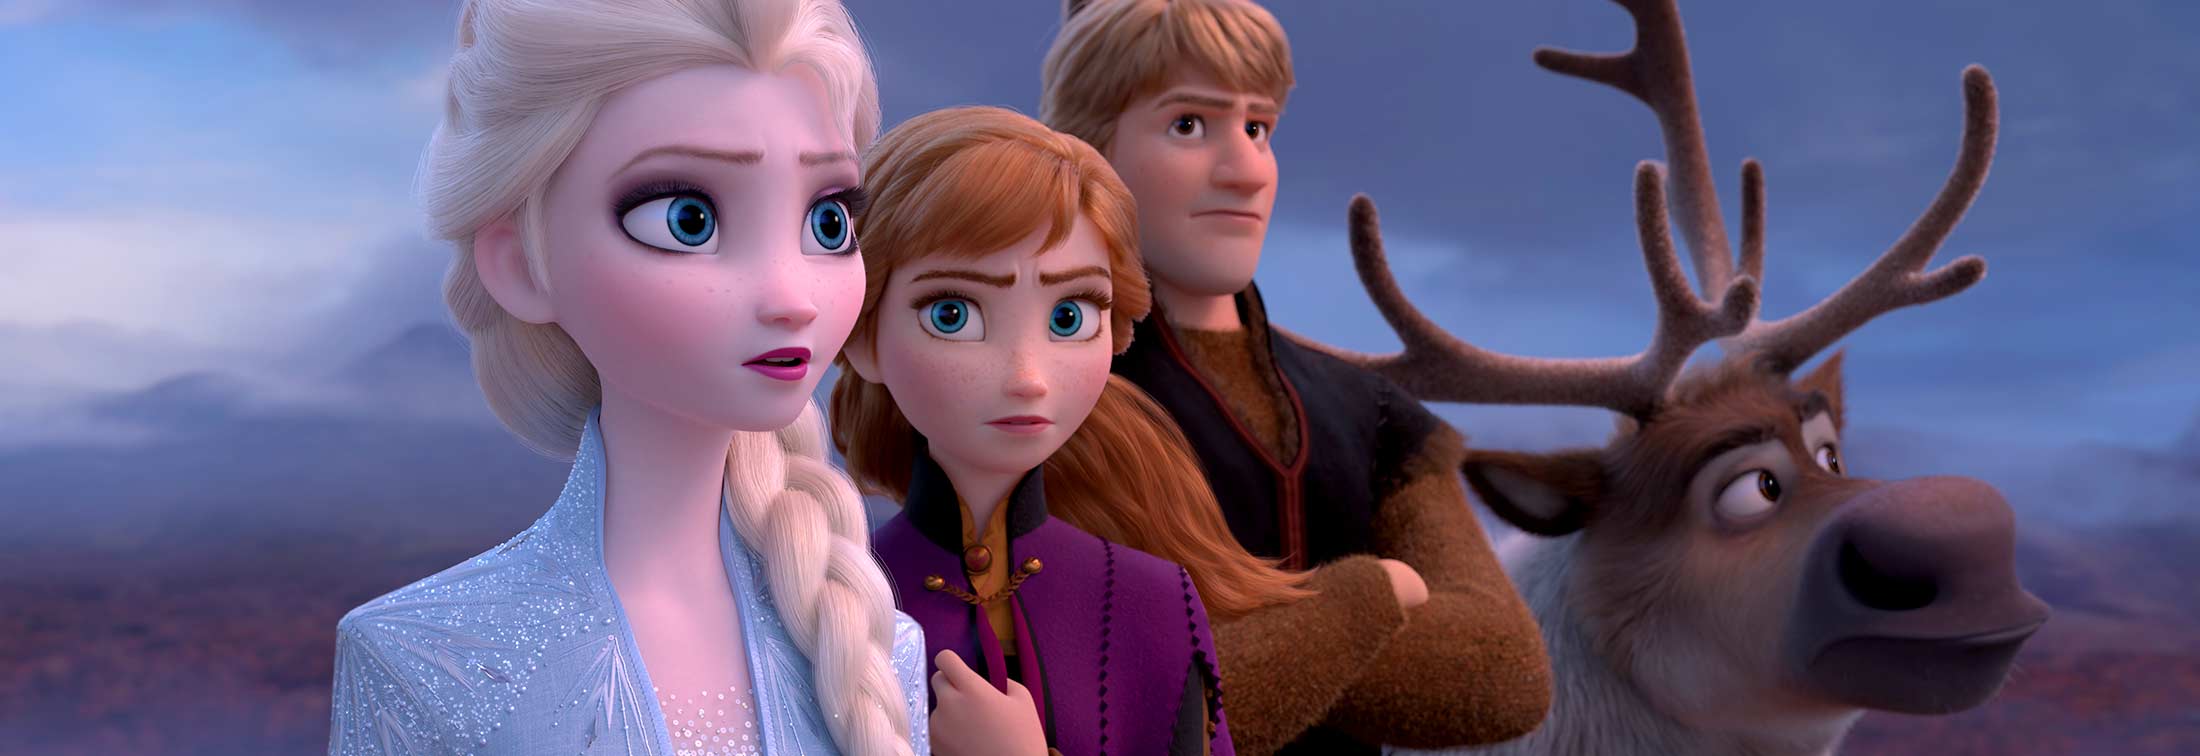 Frozen 2 - Elsa and Anna return with the magic (mostly) intact